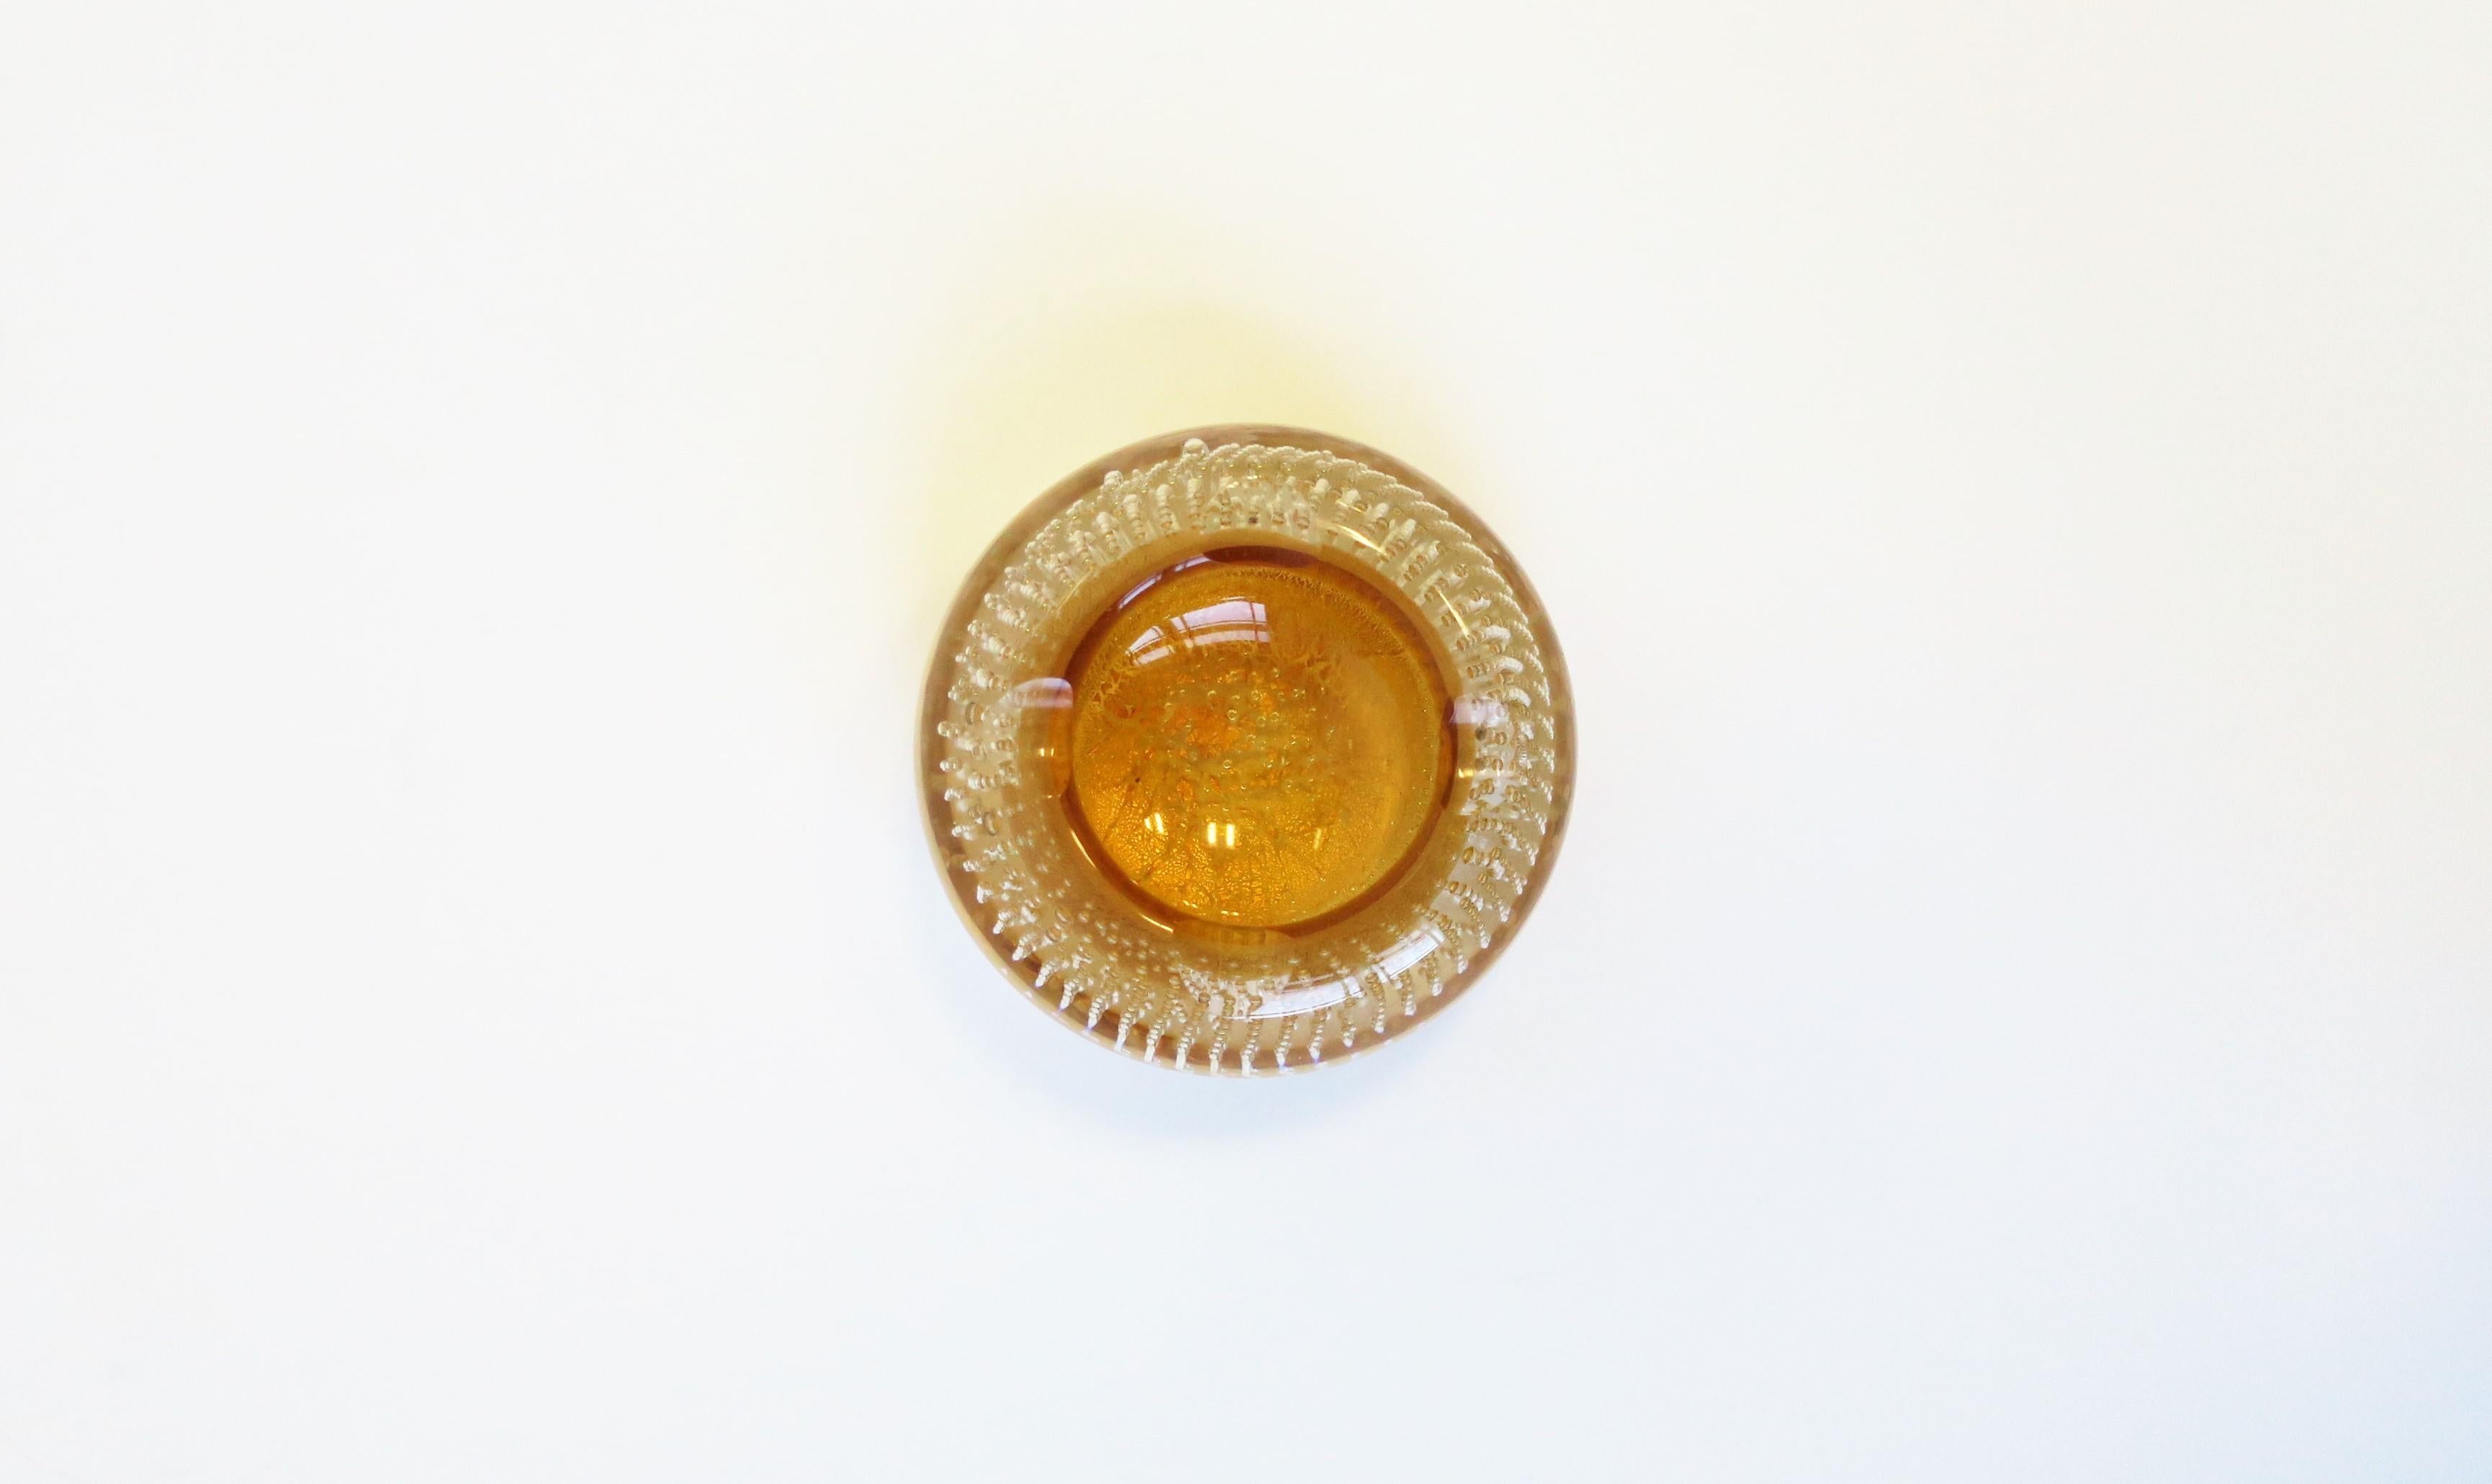 A beautiful Italian Murano 'Bullicante' golden yellow art glass ashtray or jewelry dish, circa mid to late-20th century, Italy. This Murano art glass piece is clear transparent with a golden yellow and shimmering gold leaf. Piece has a very small